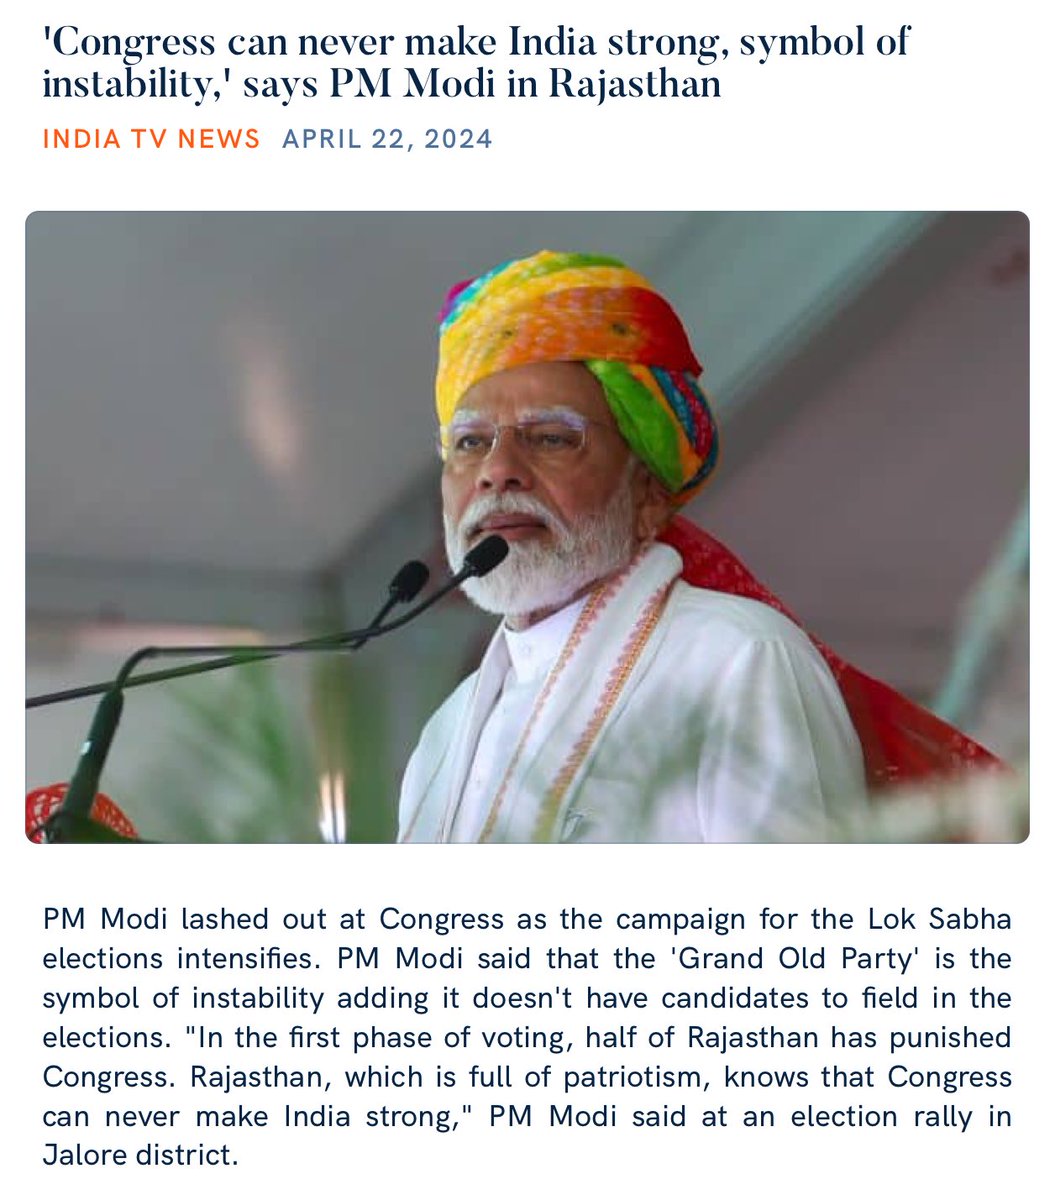 'Congress can never make India strong, symbol of instability,' says PM Modi in Rajasthan indiatvnews.com/rajasthan/pm-m… via NaMo App